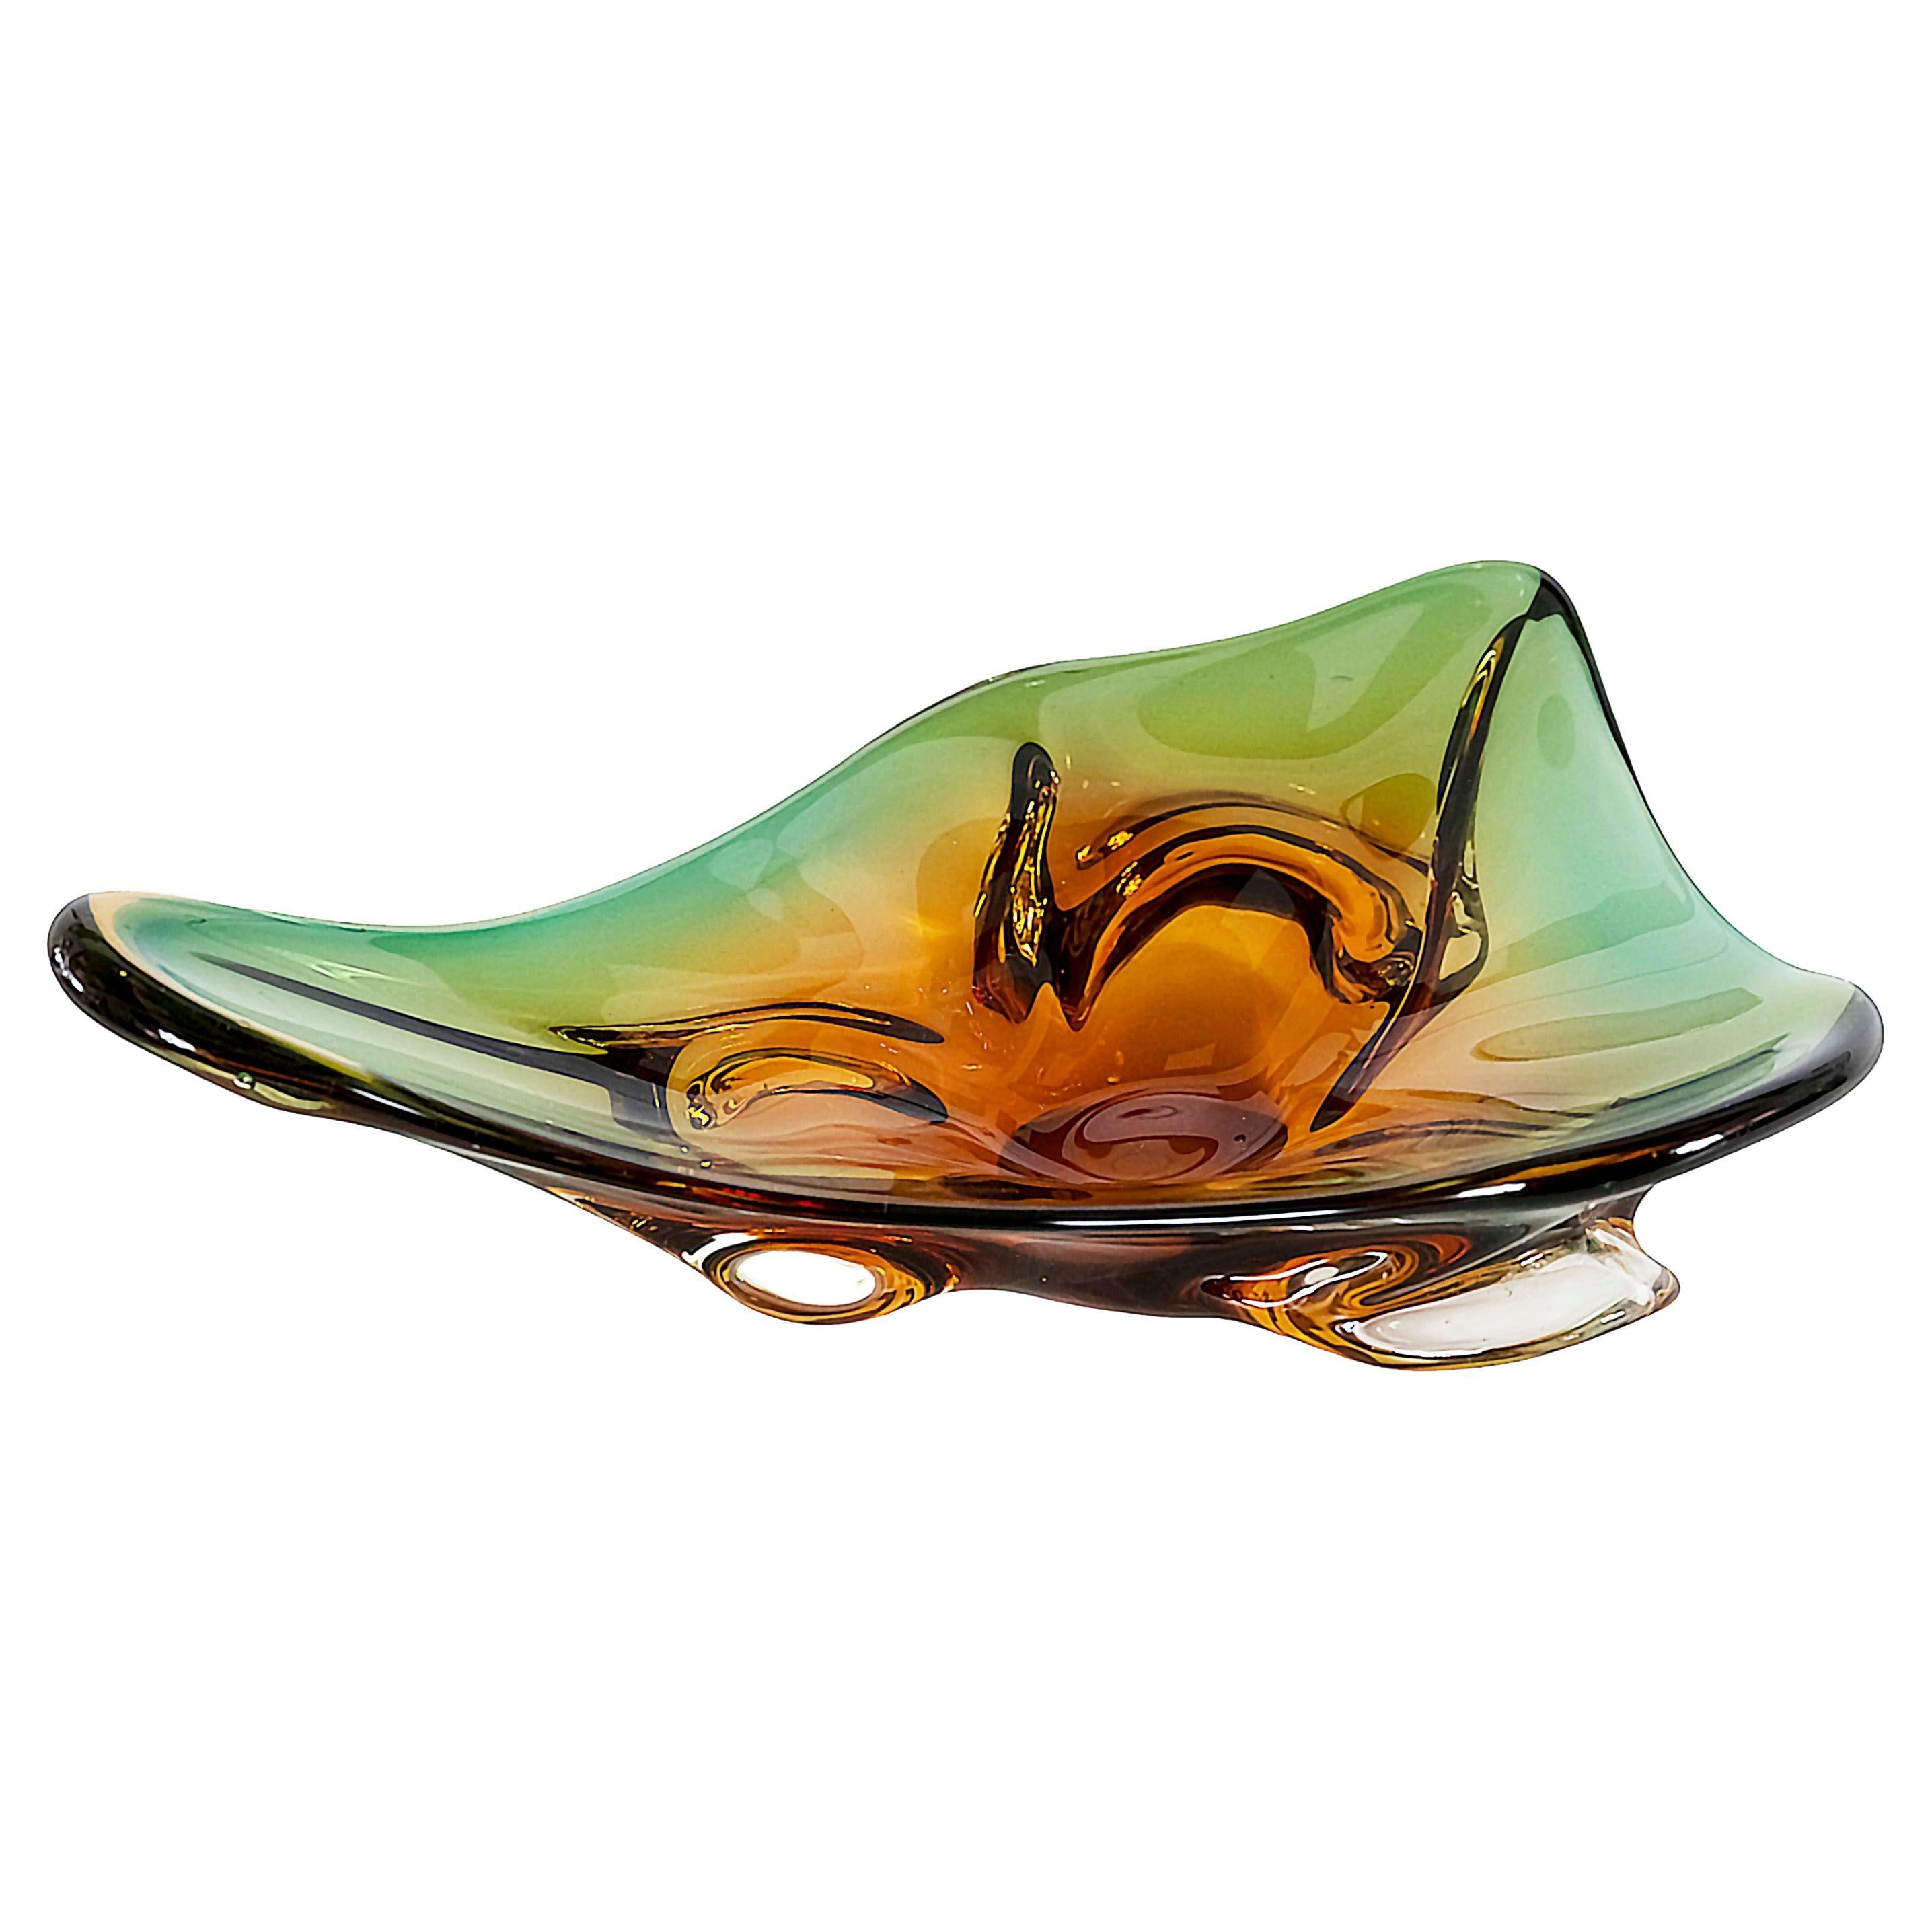 Vintage Italian handmade Murano glass vase / centerpiece in asymmetric shape.
The glass is yellow/orange/green colors.
Heavy and solid.
Very good/excellent condition.
